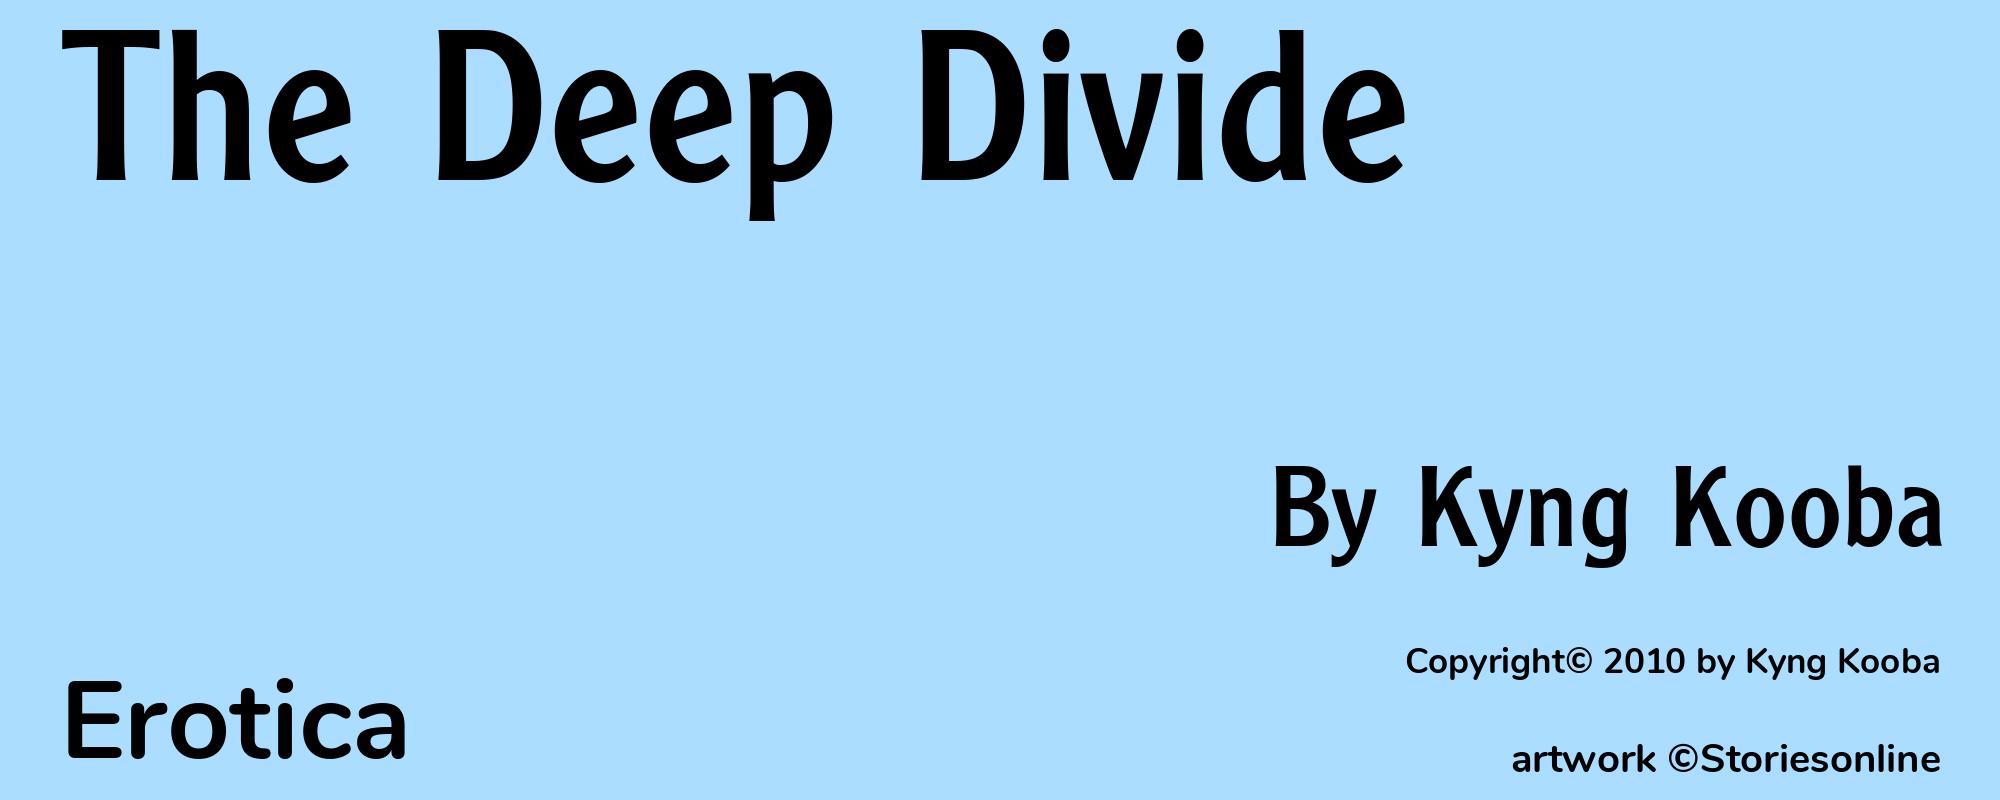 The Deep Divide - Cover